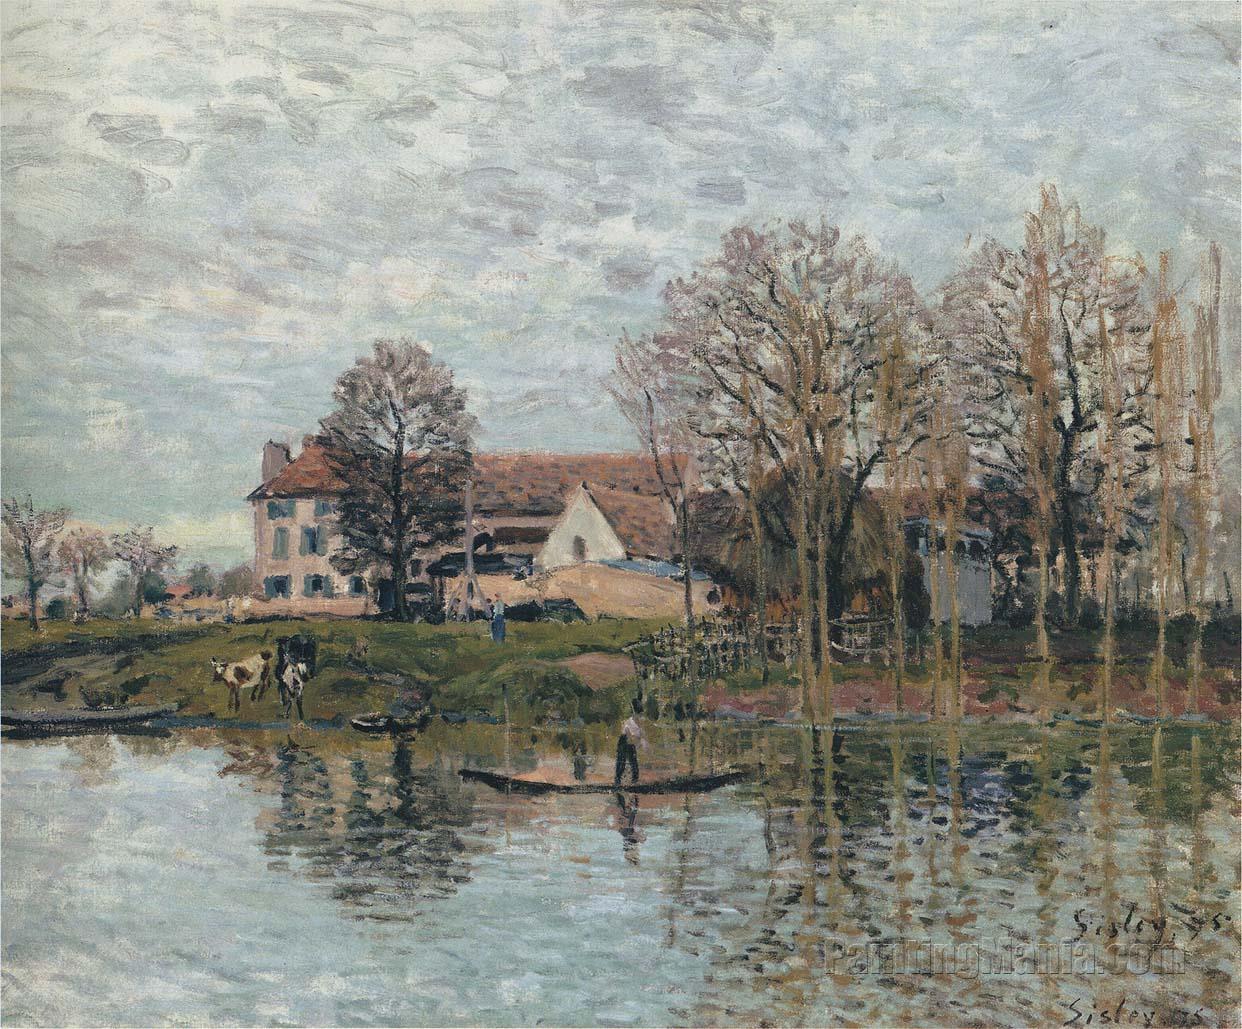 Banks of the Seine at Port-Marly